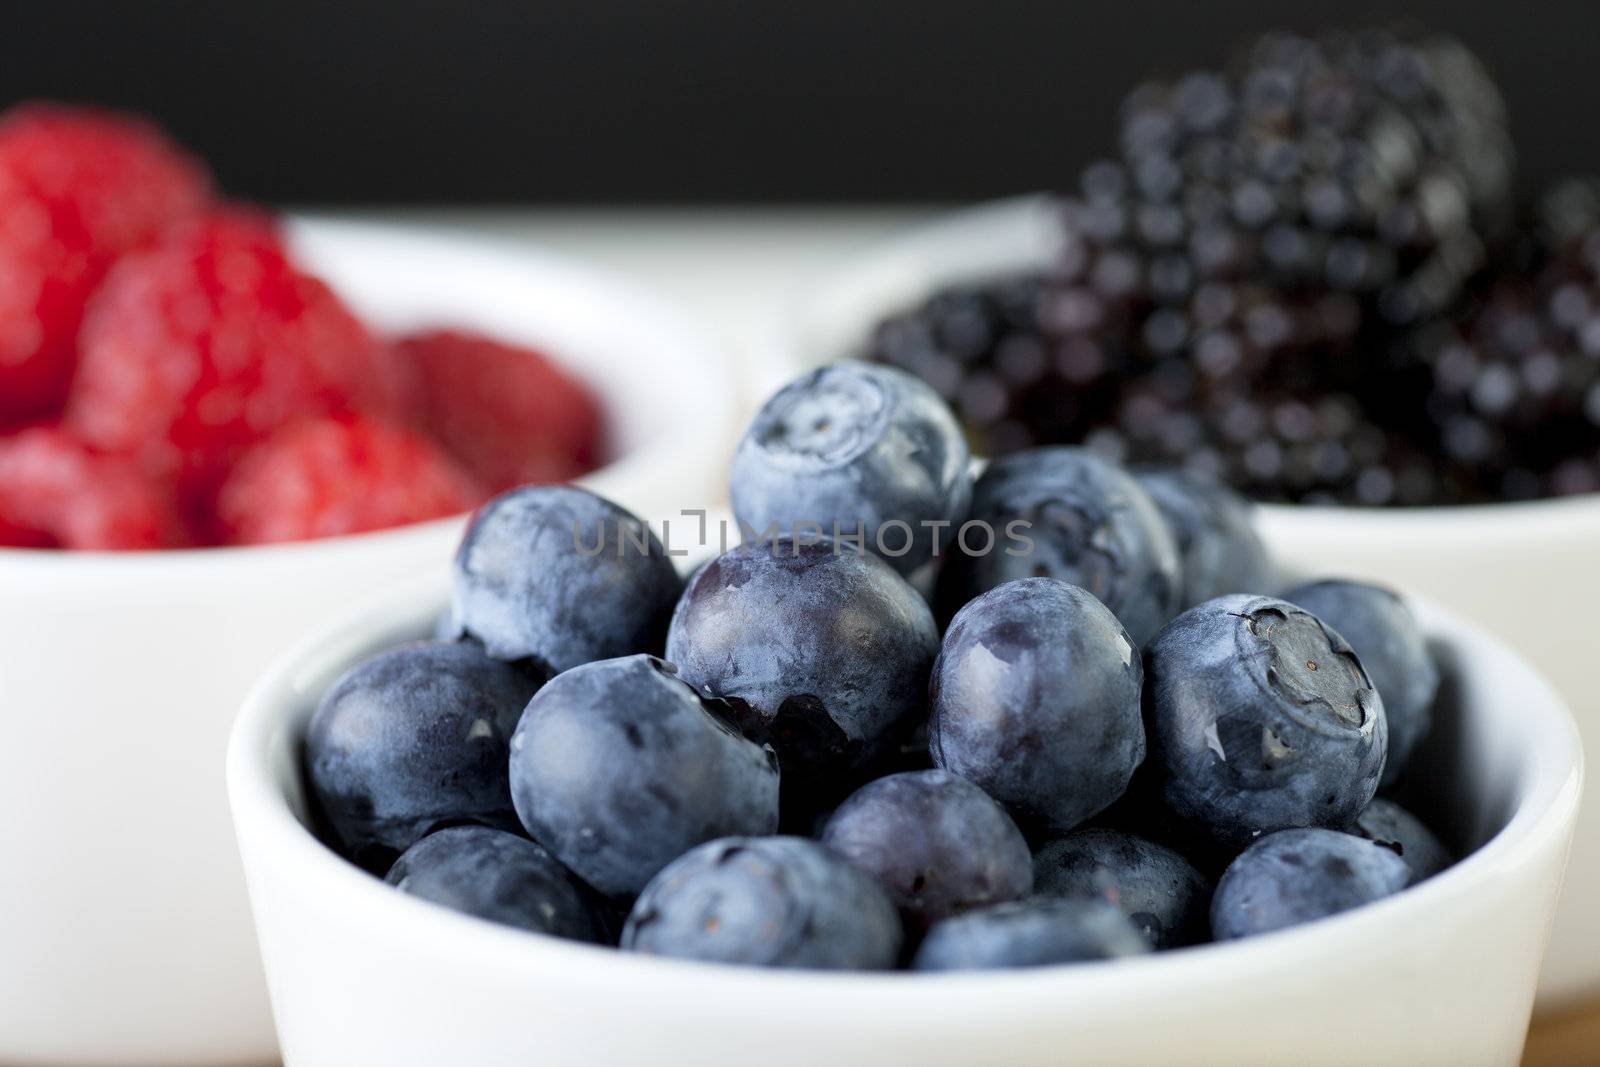 Blueberries in white bowl with raspberries and blackberries in background.